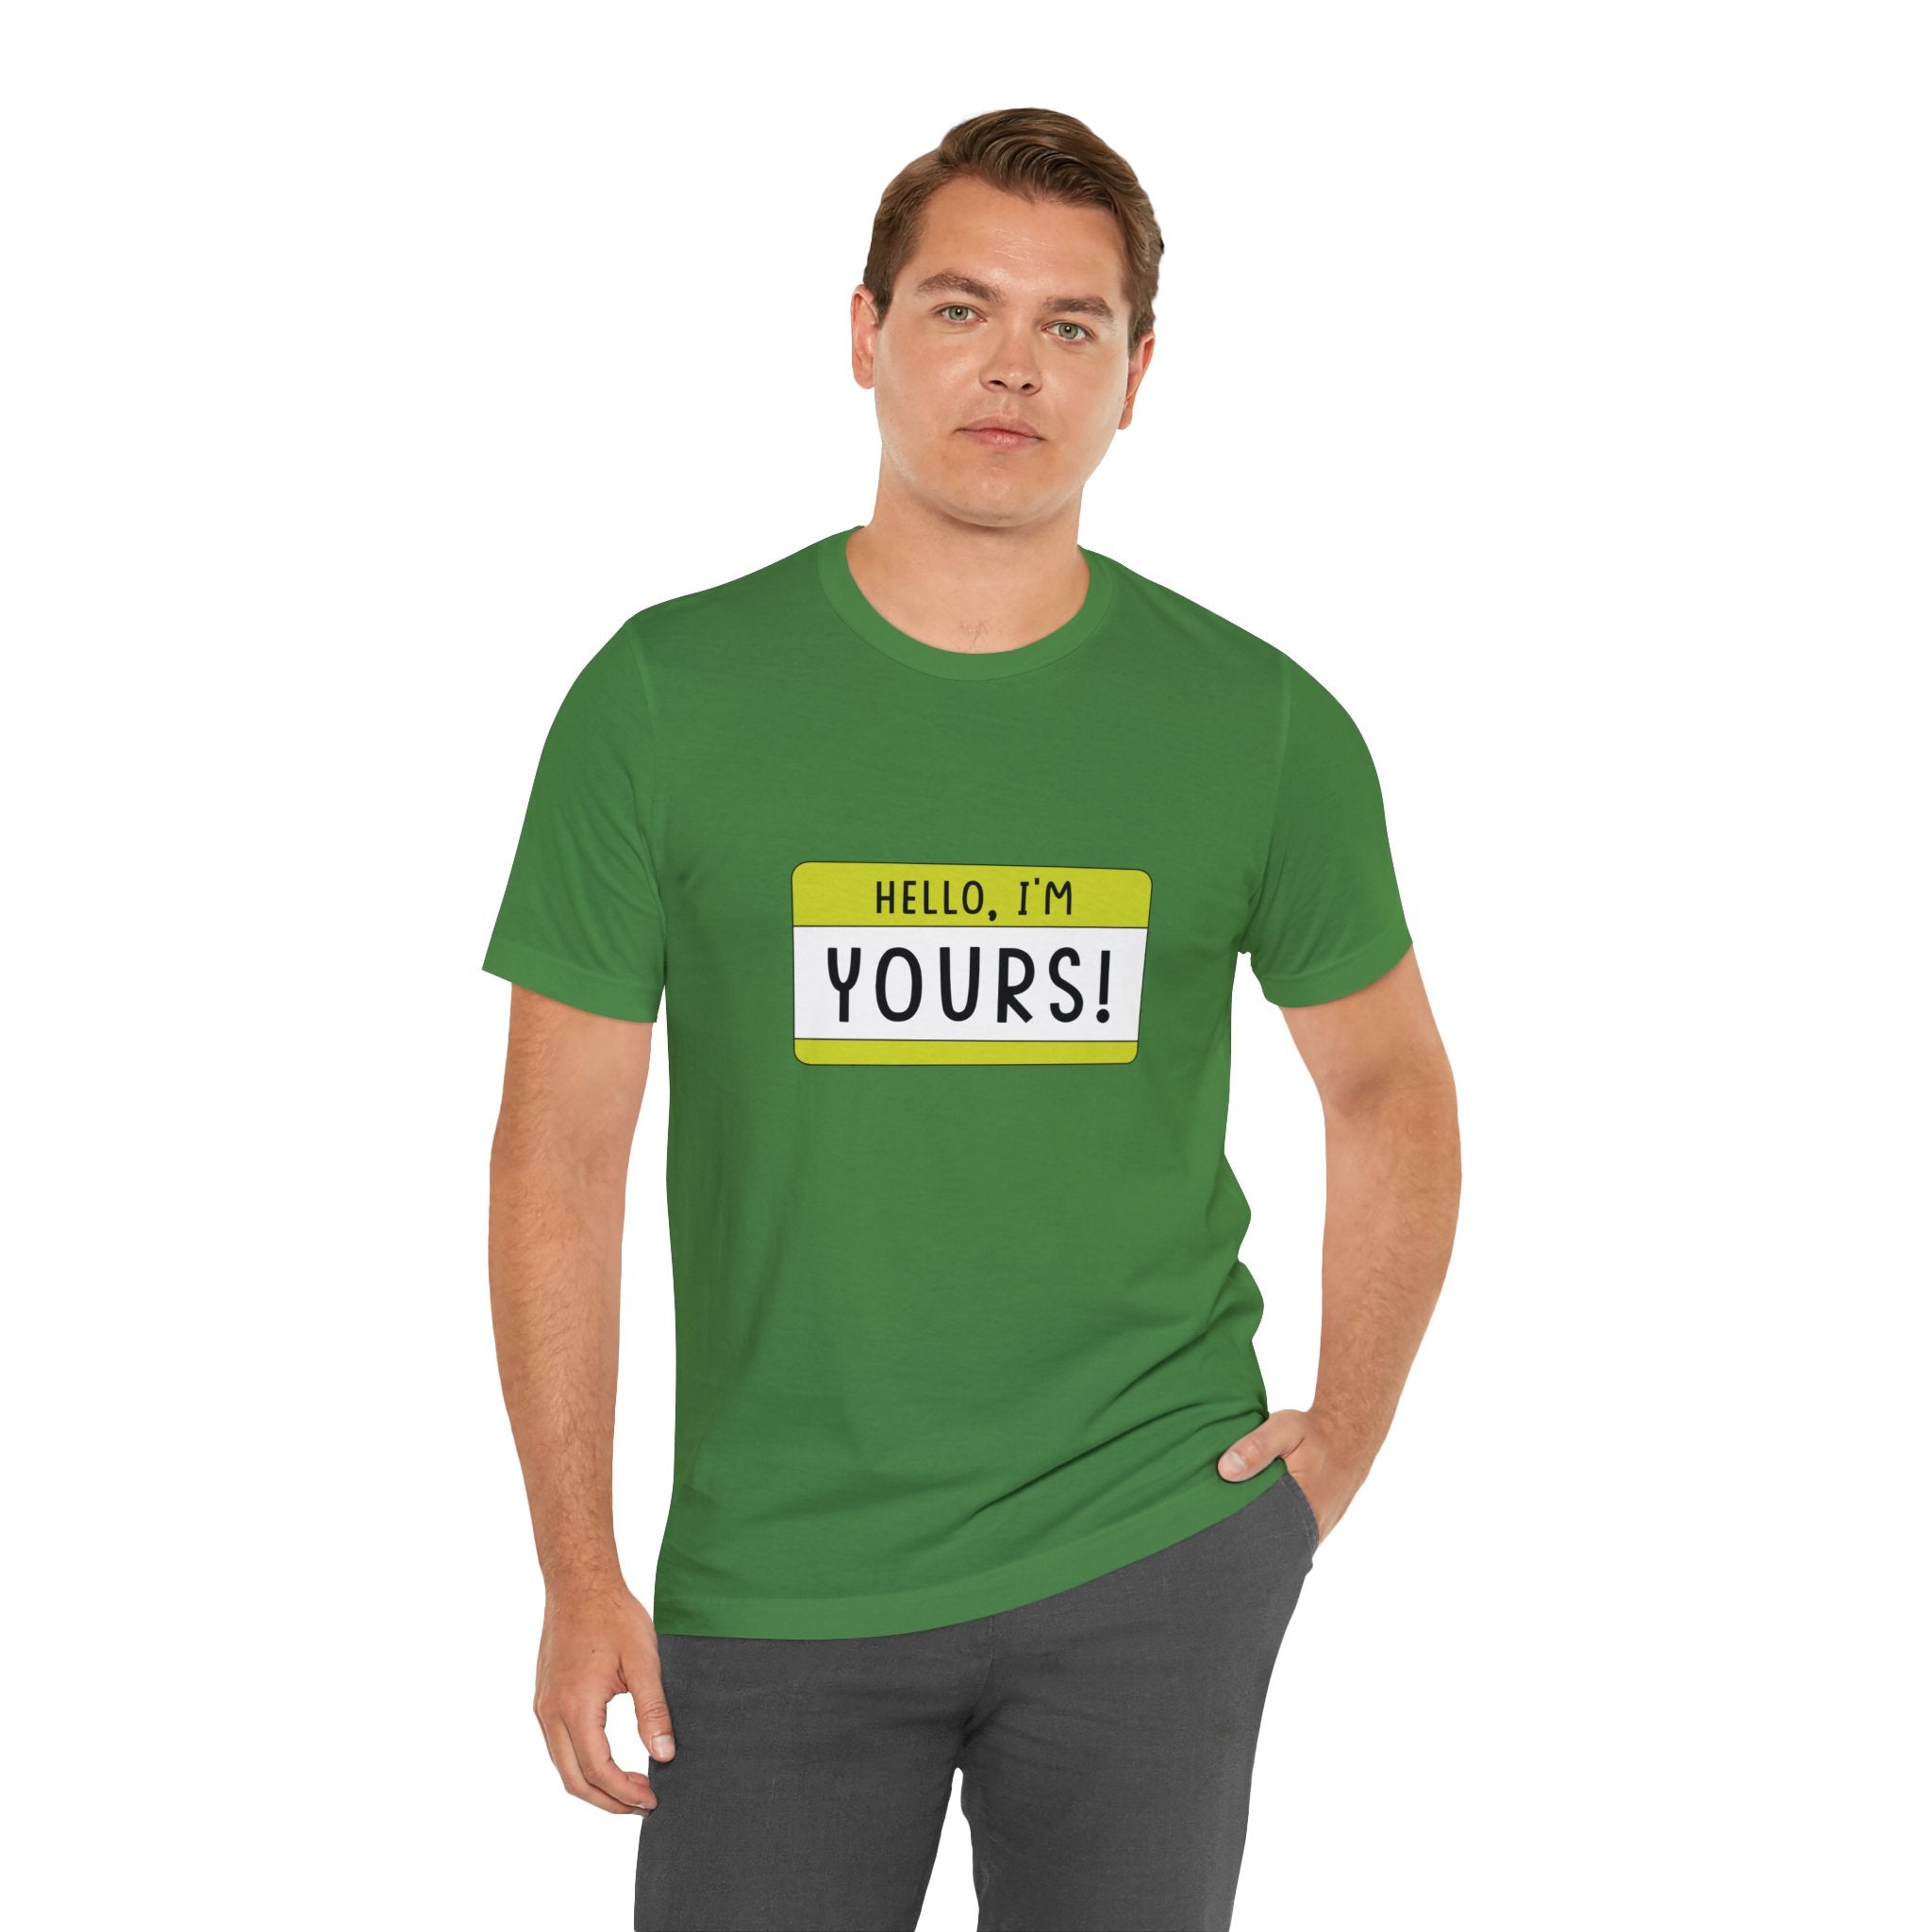 Hello, I'm YOURS T-Shirt